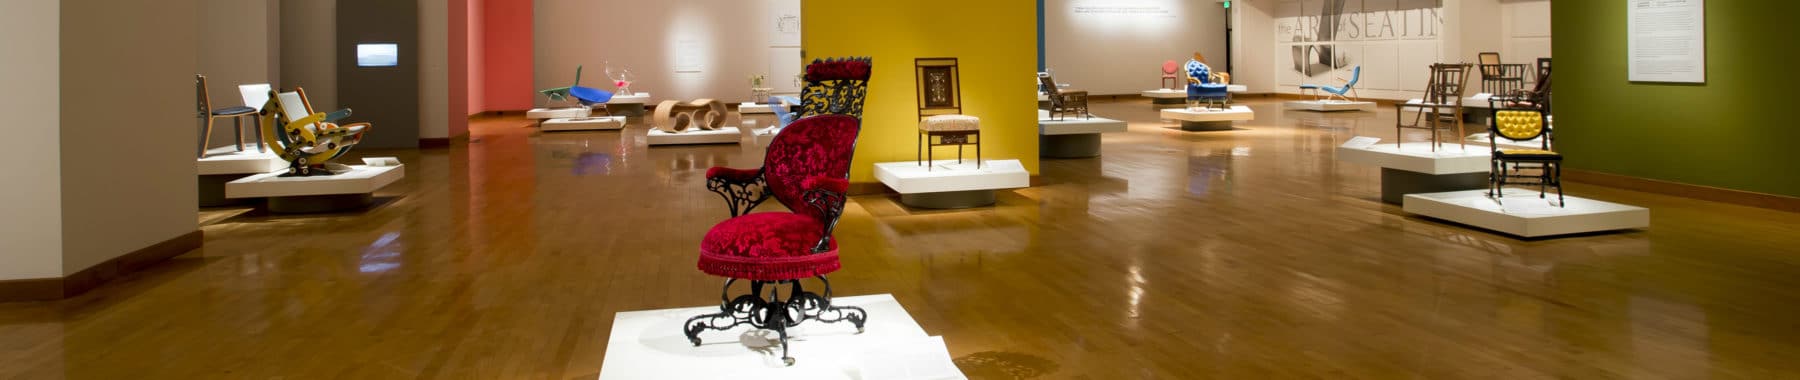 The Art of Seating: 200 Years of American Design